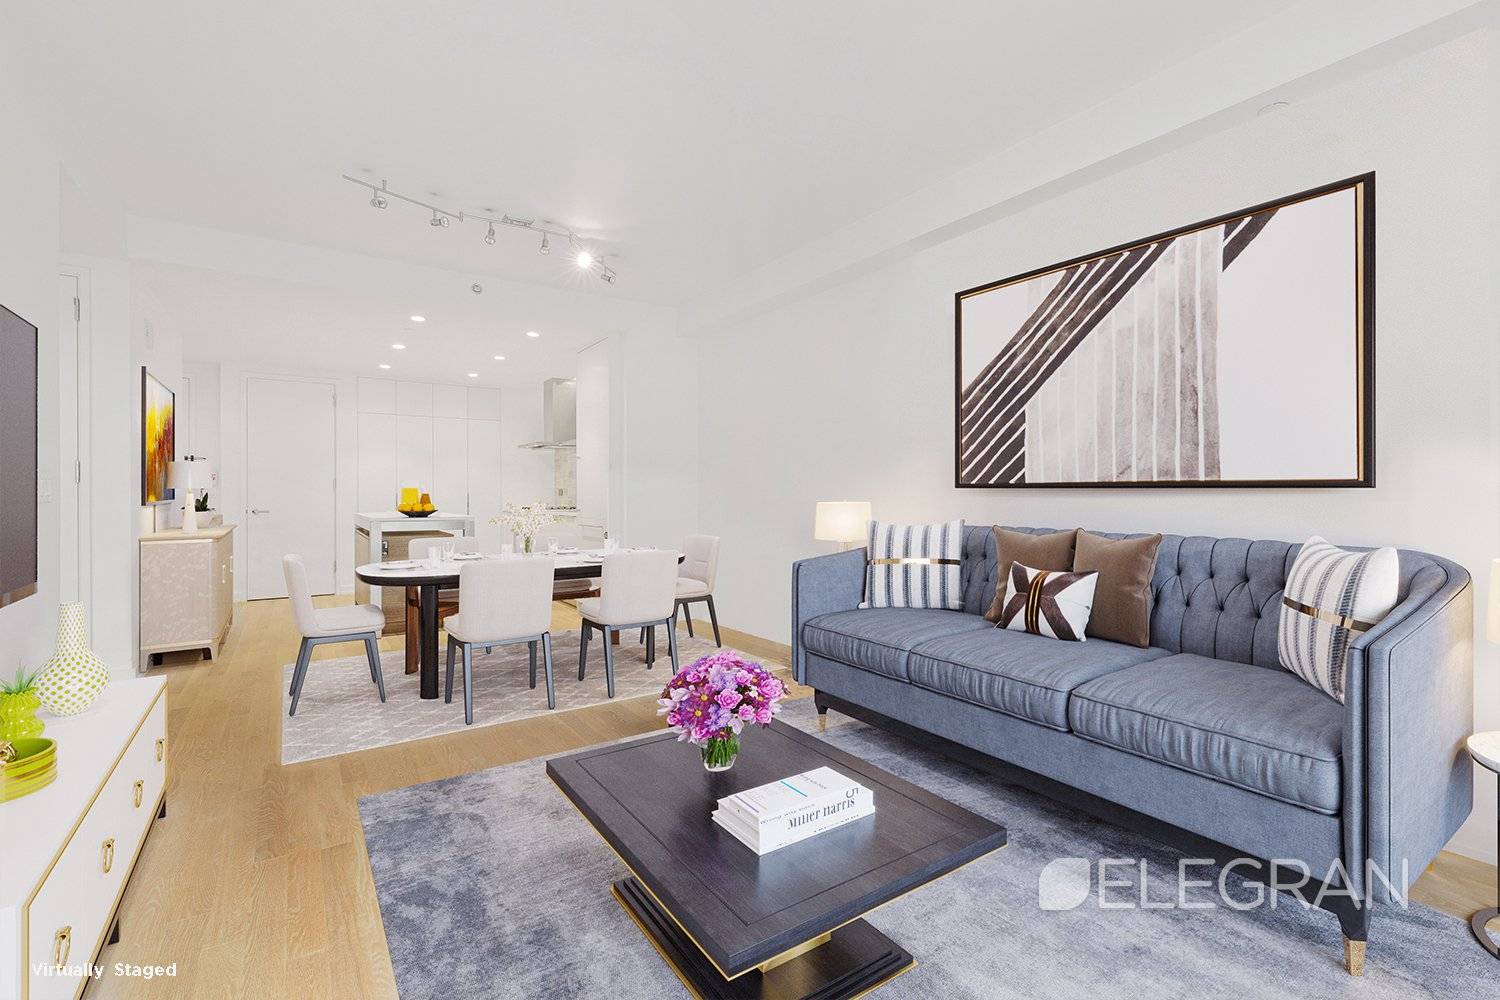 One of New York's best developers, The Naftali Group joined forces with The Rottet Studios in 2016 to create this highly desirable Gramercy boutique condominium.